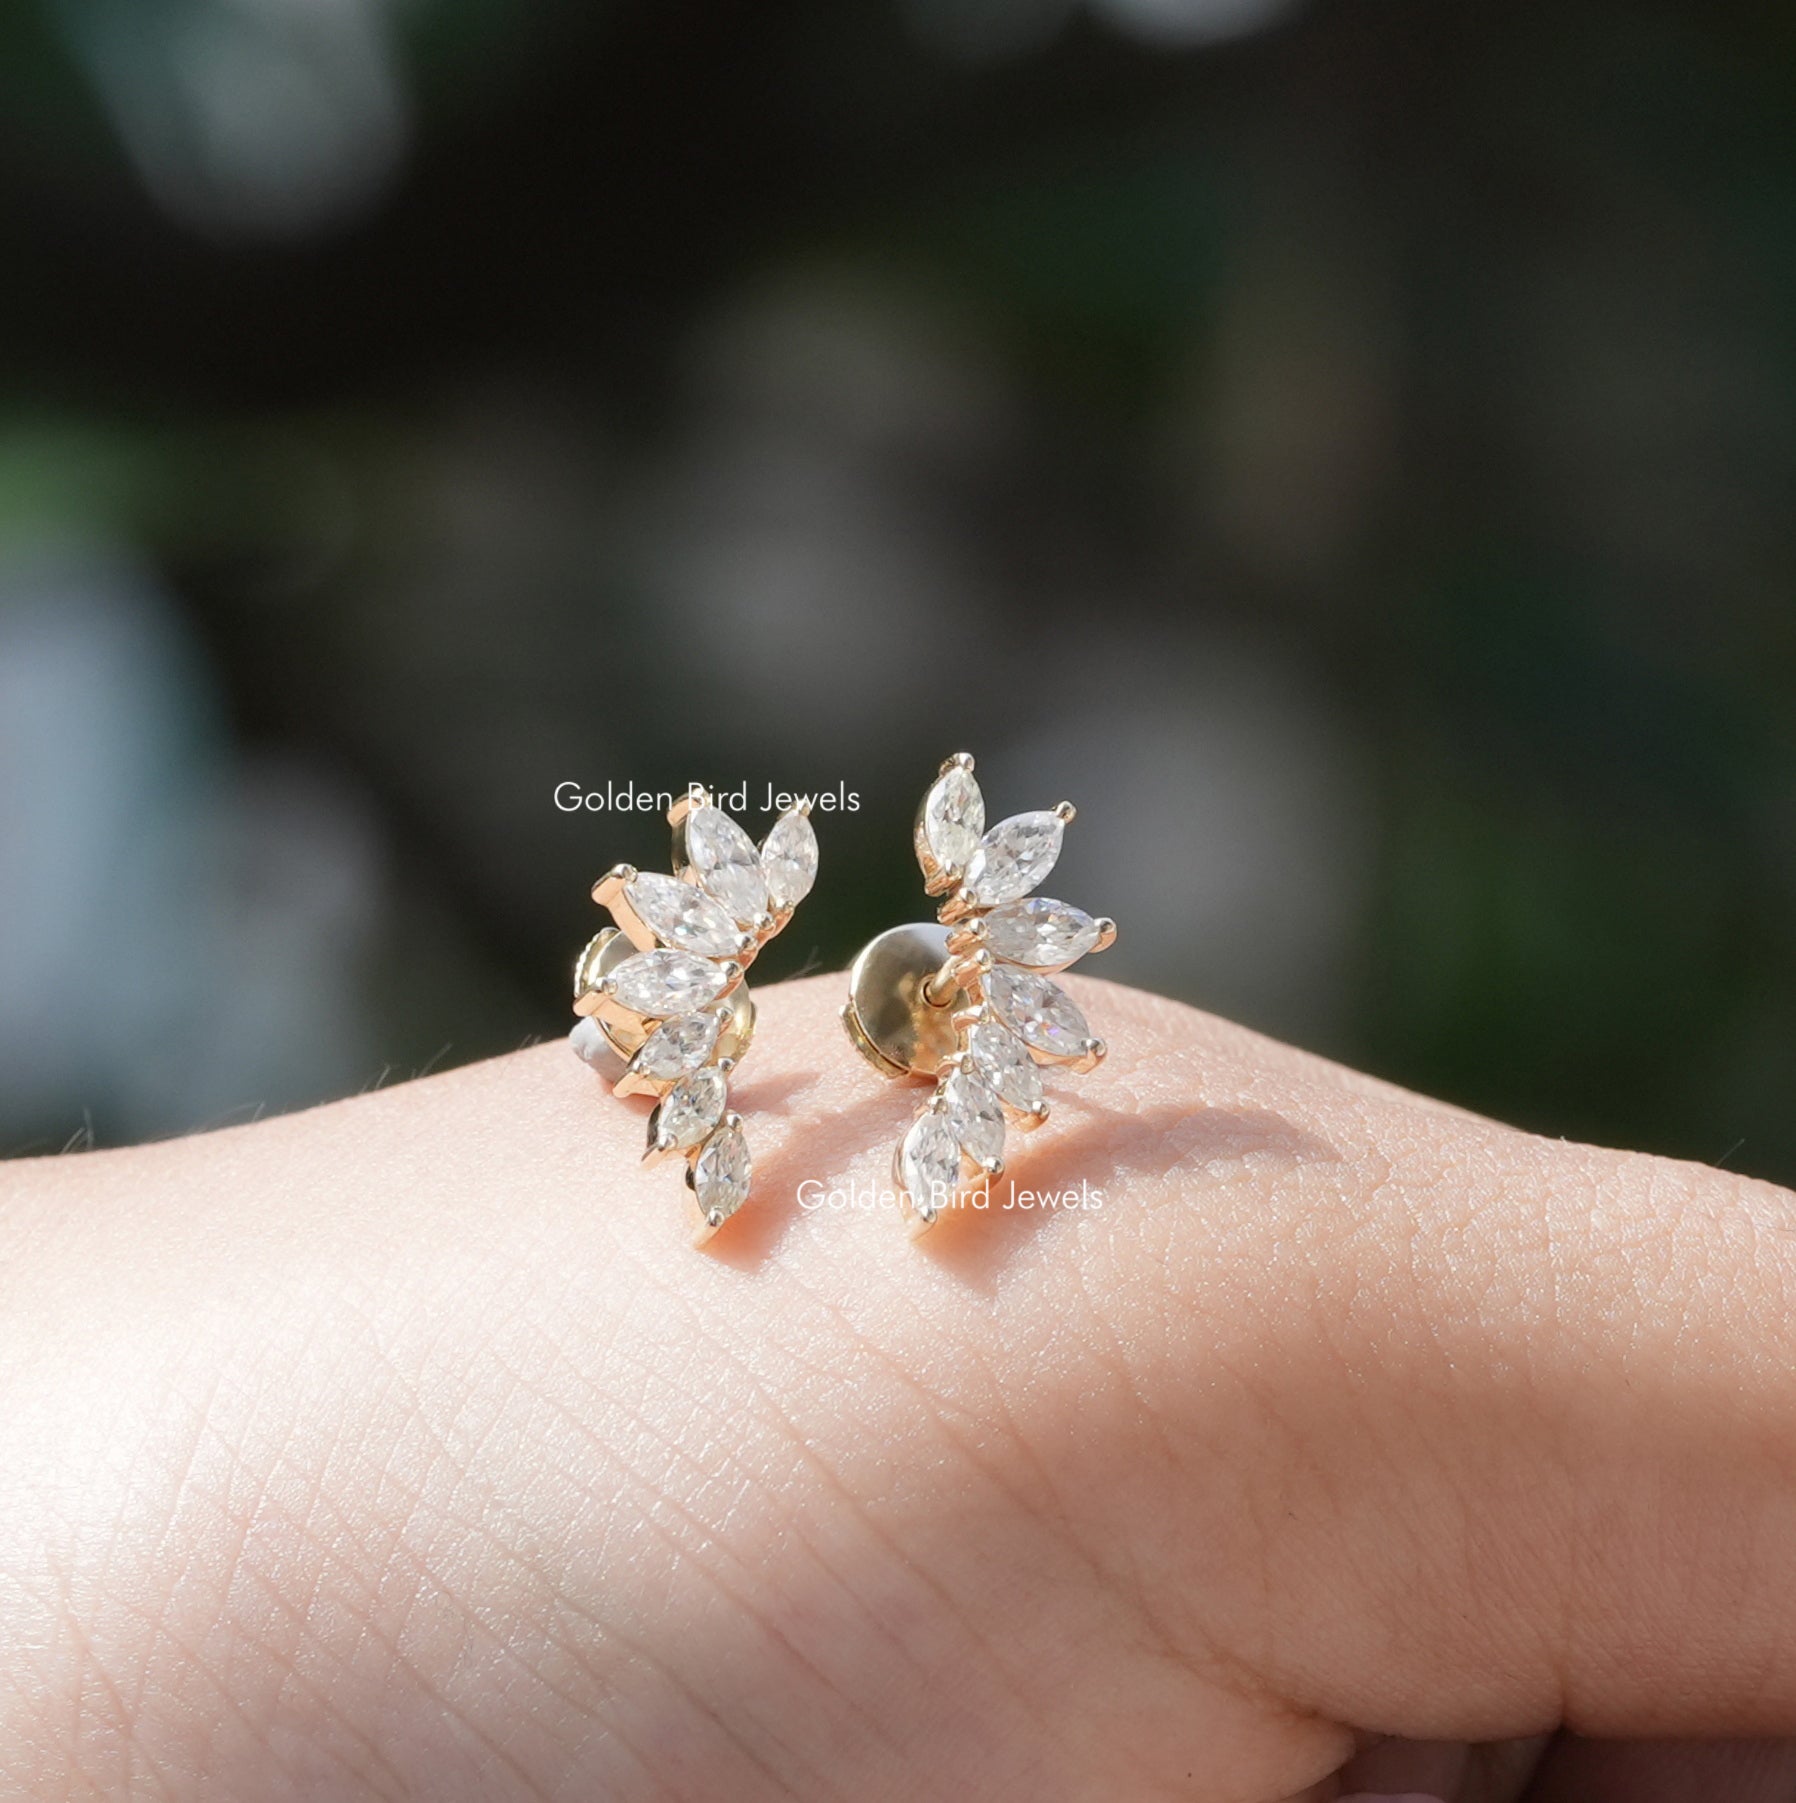 [Front view of marquise cut moissanite stud earrings]-[Golden Bird Jewels]